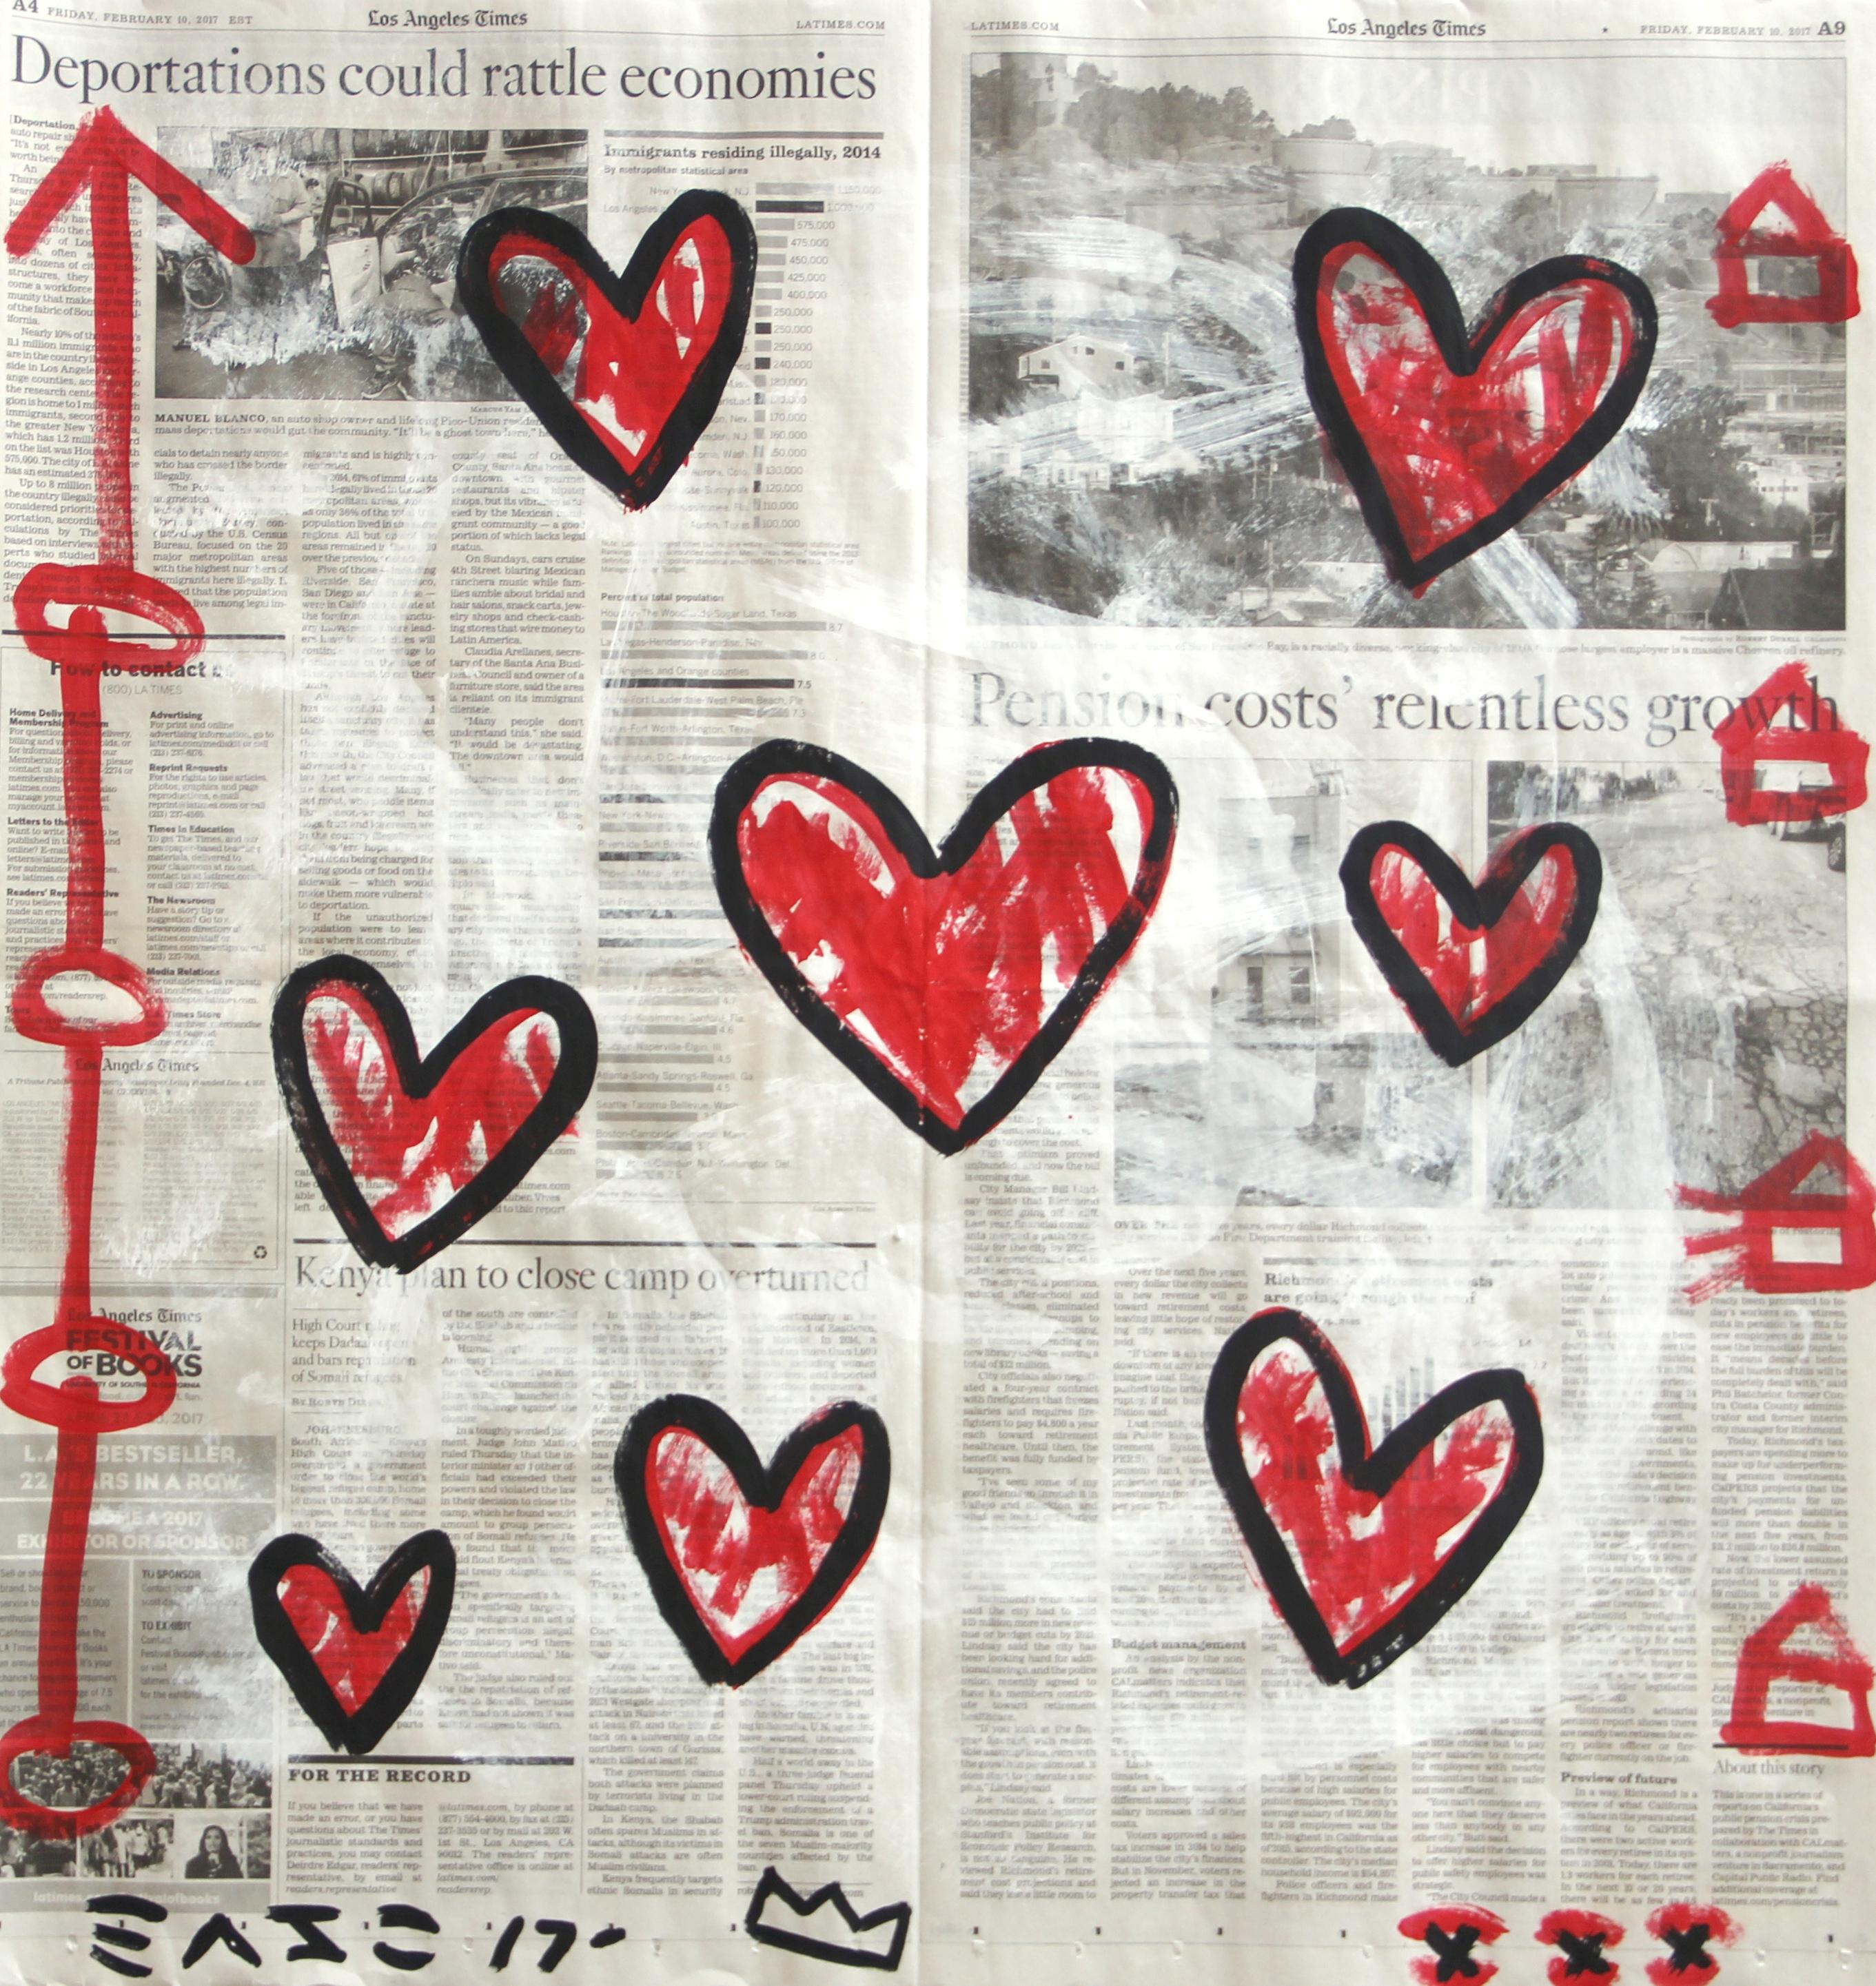 "Love for the Record" - Original Pop Red Hearts on Newspaper by Gary John